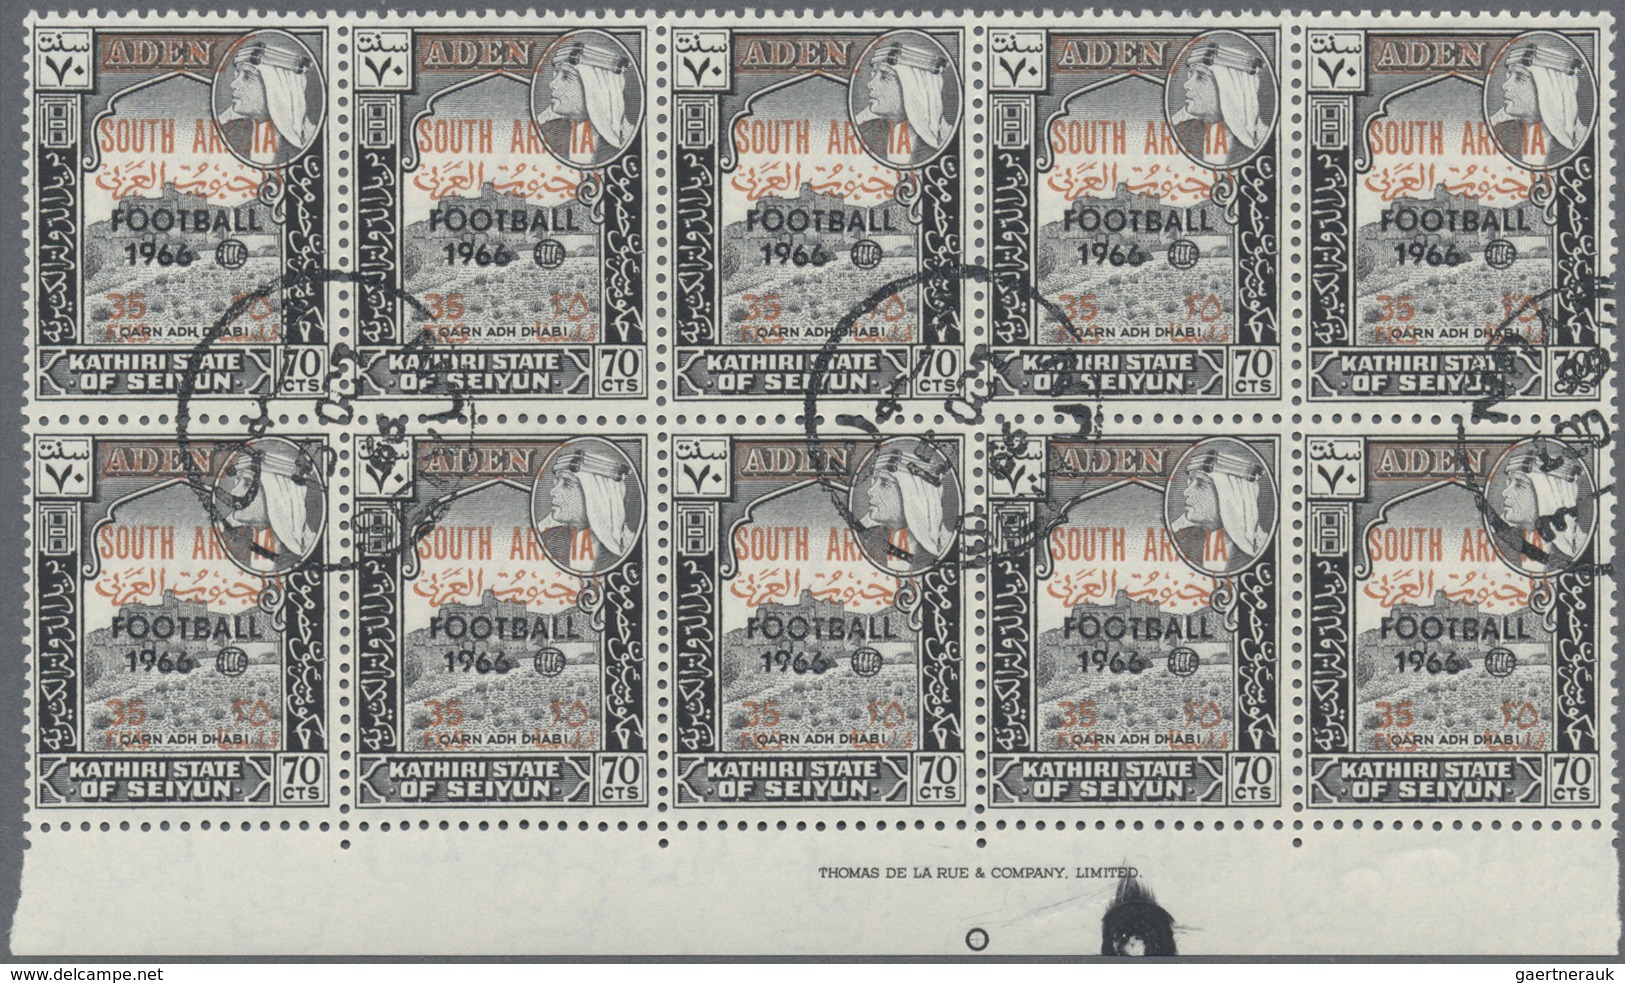 O Aden - Kathiri State of Seiyun: 1966, definitives stamps with bilingual opt. SOUTH ARABIA + new deno